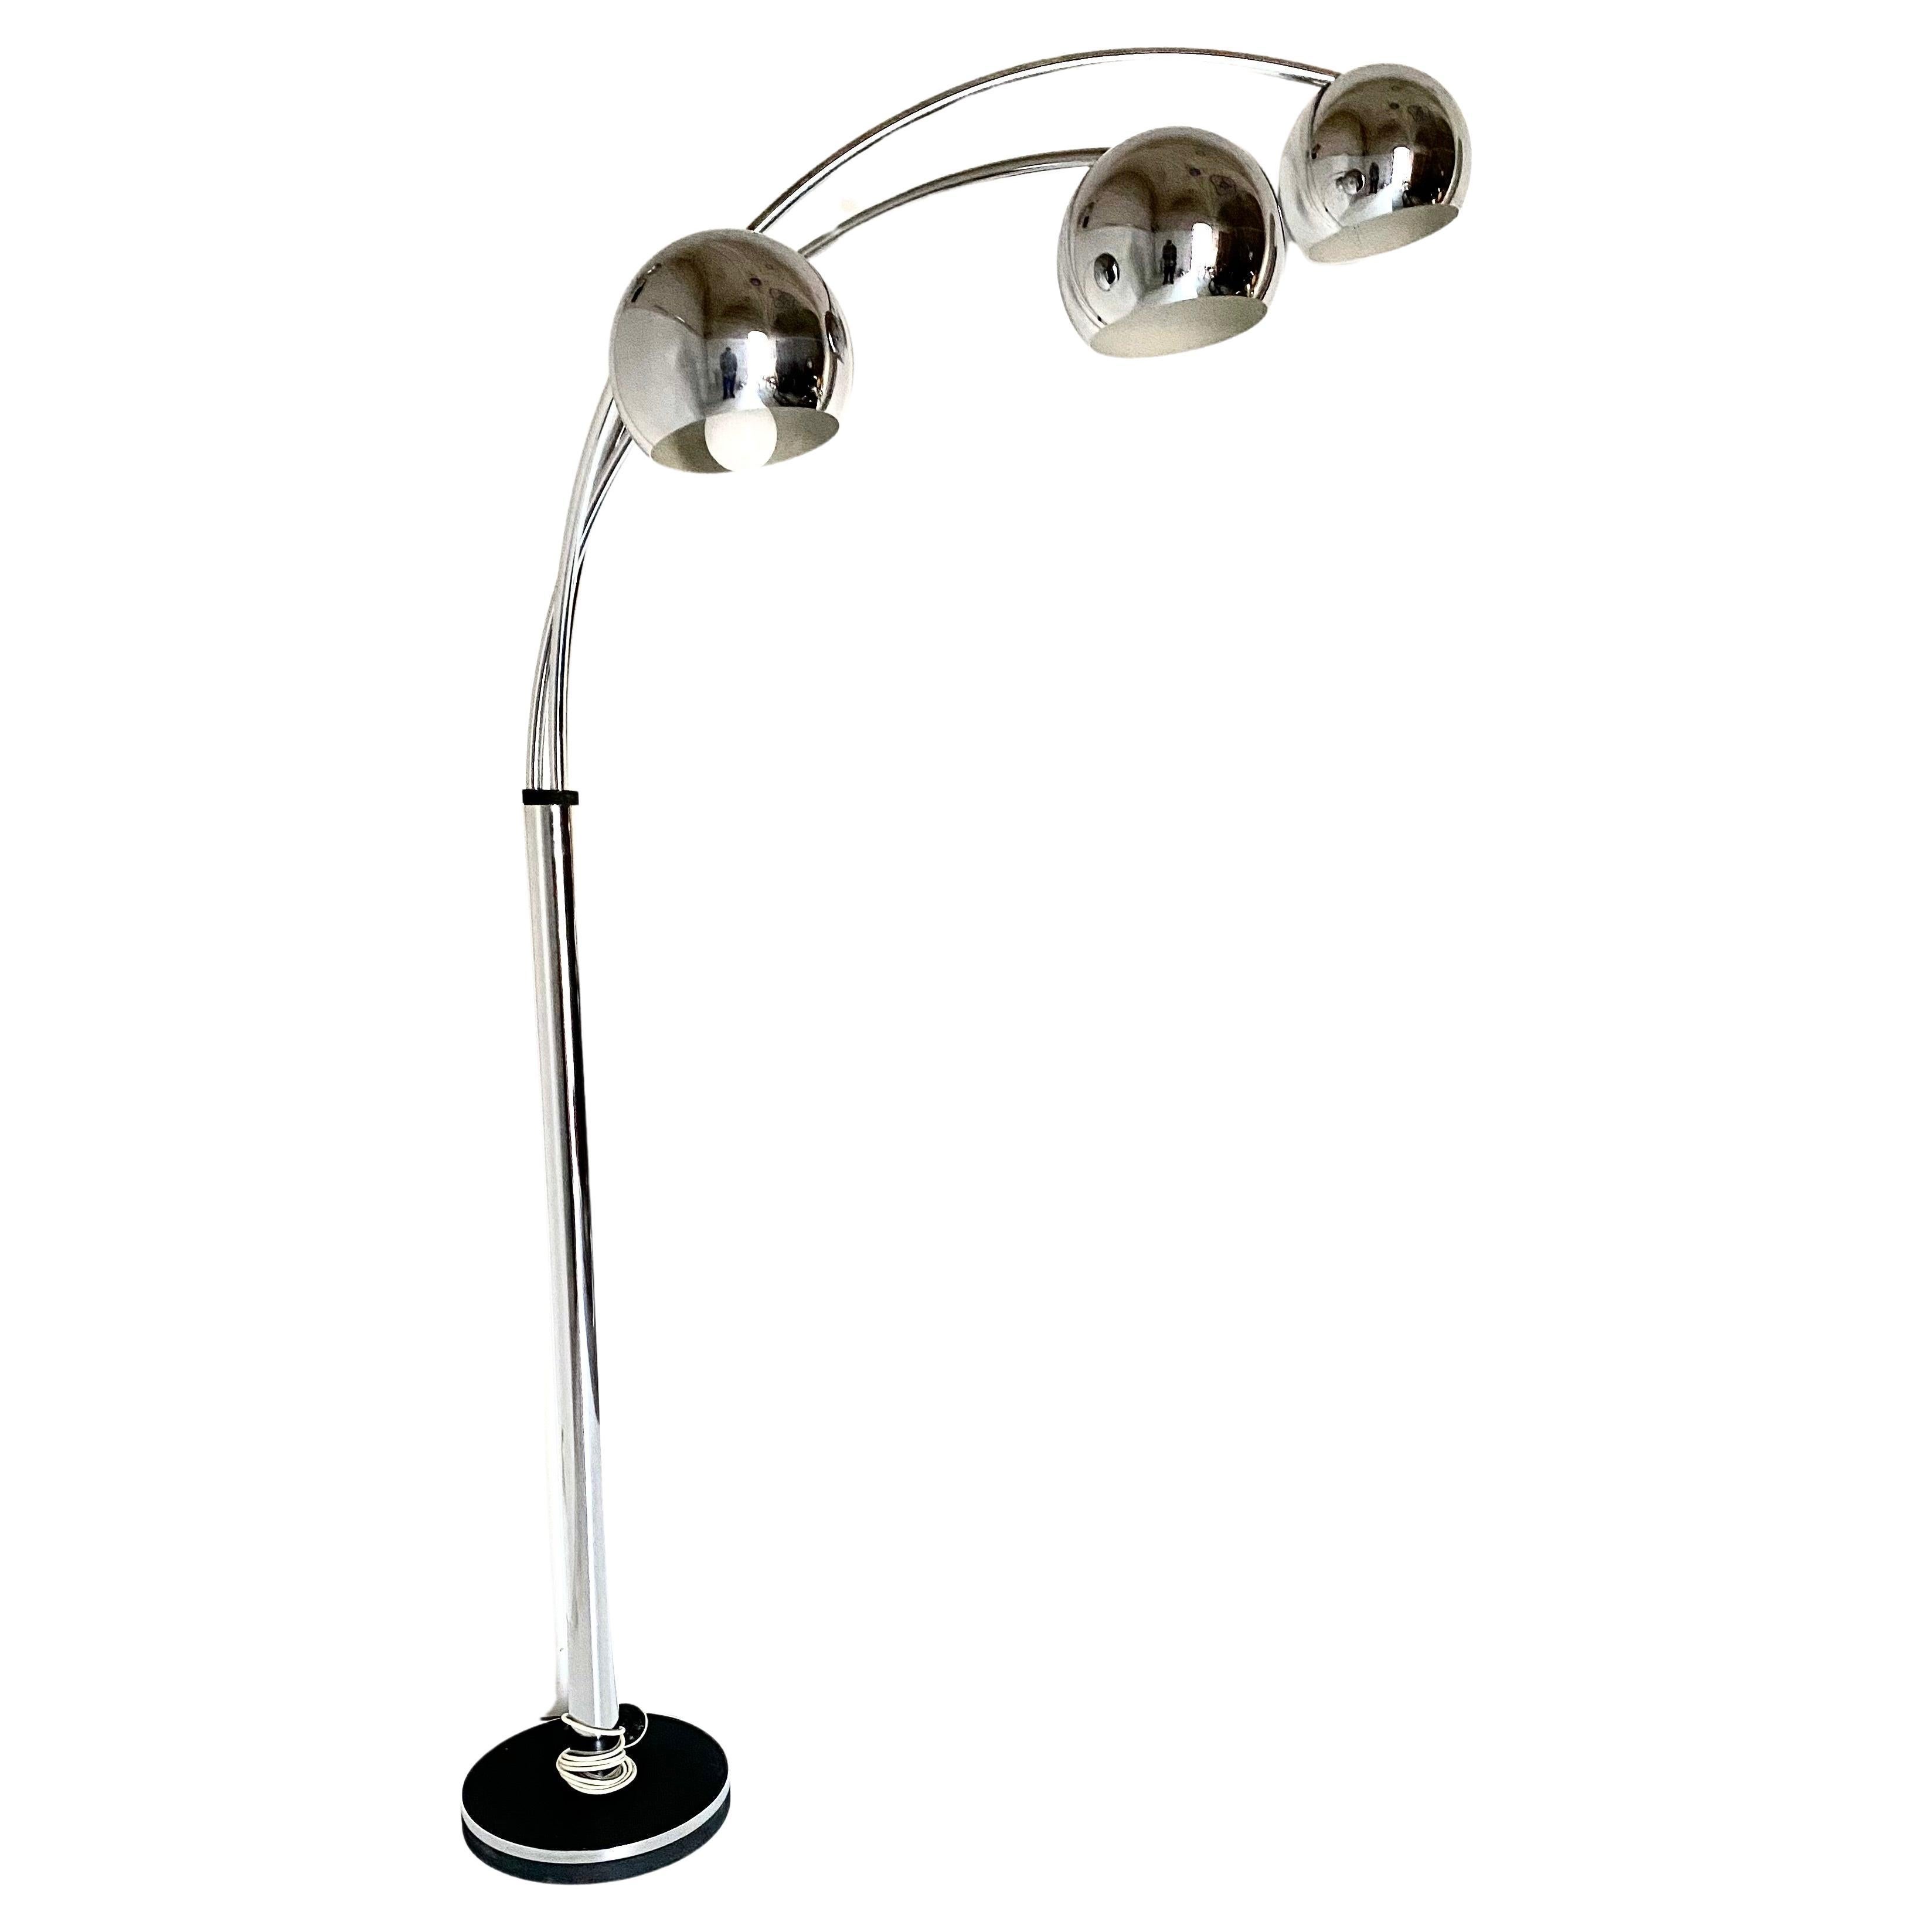 Big vintage floor lamp in space age style, Reggiani, Italy 1960s. 
Steel chromed stucture with three adjustable sticks and flexible lights spots. 
Chromed has been polished and revised. Perfectly working and in really good conditions with only few